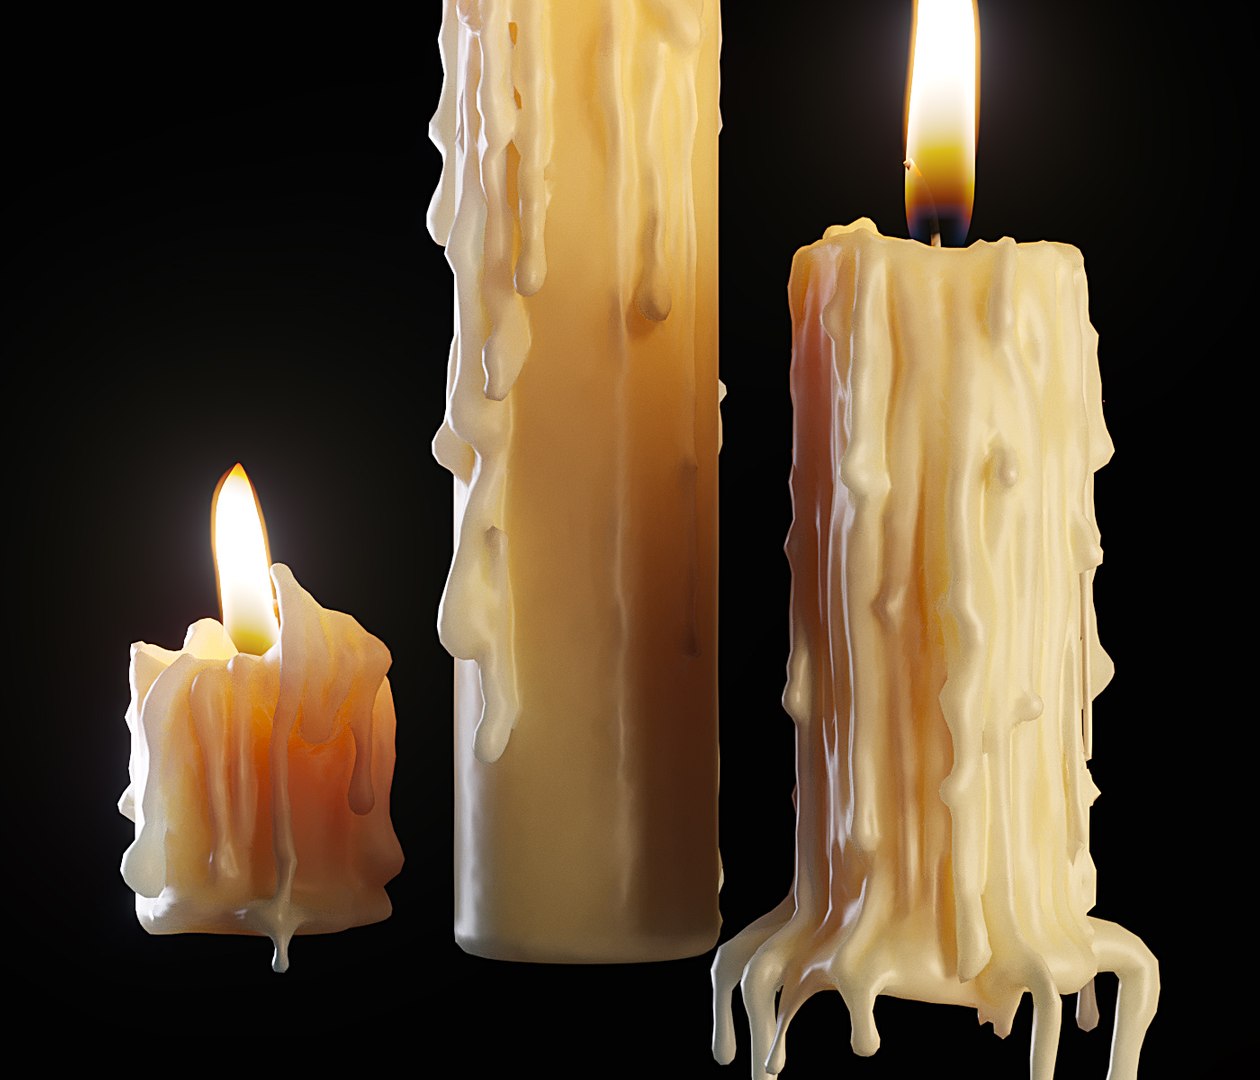 22,633 Melting Candle Images, Stock Photos, 3D objects, & Vectors